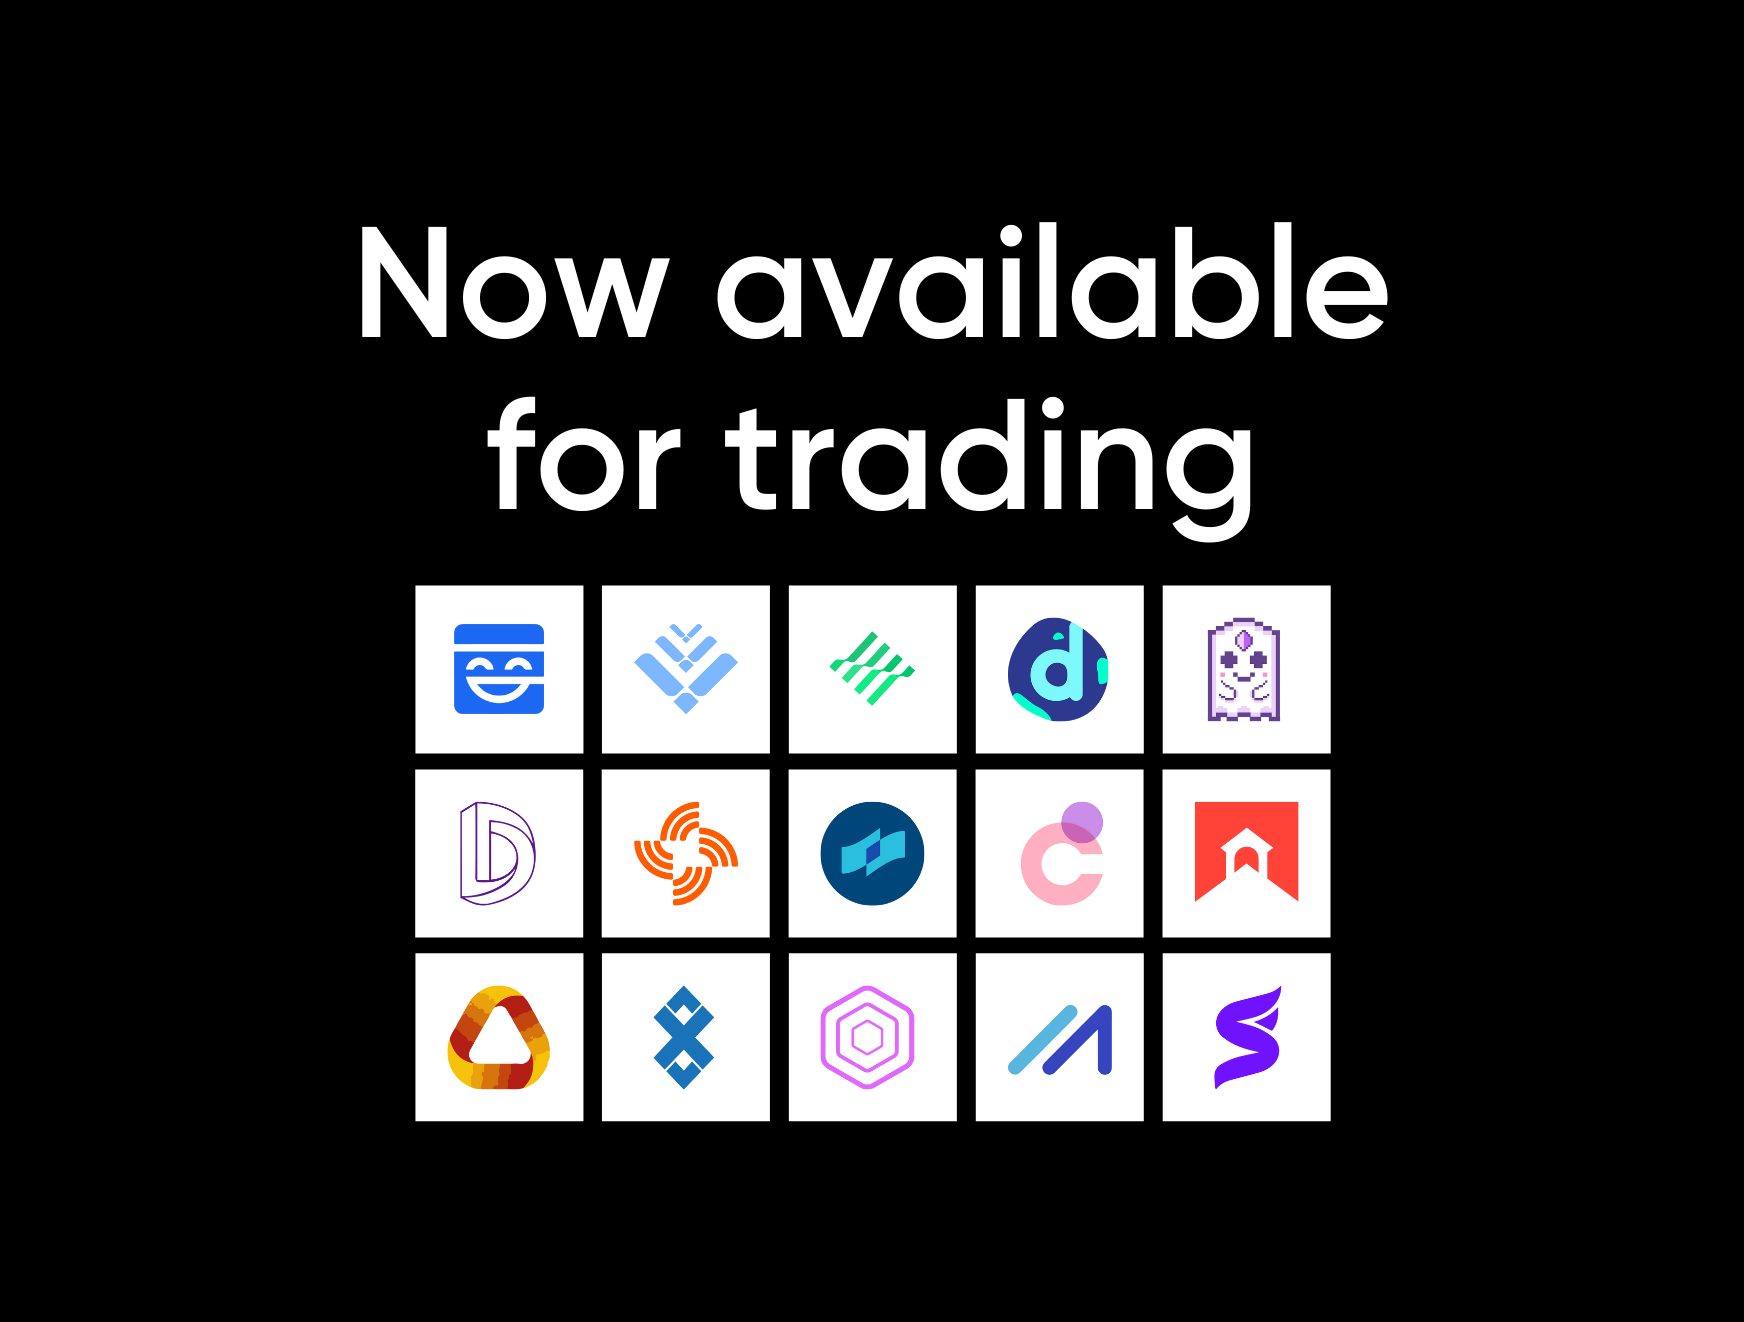 15 New Asset Listings; More Than 150 Assets Now on Bitvavo